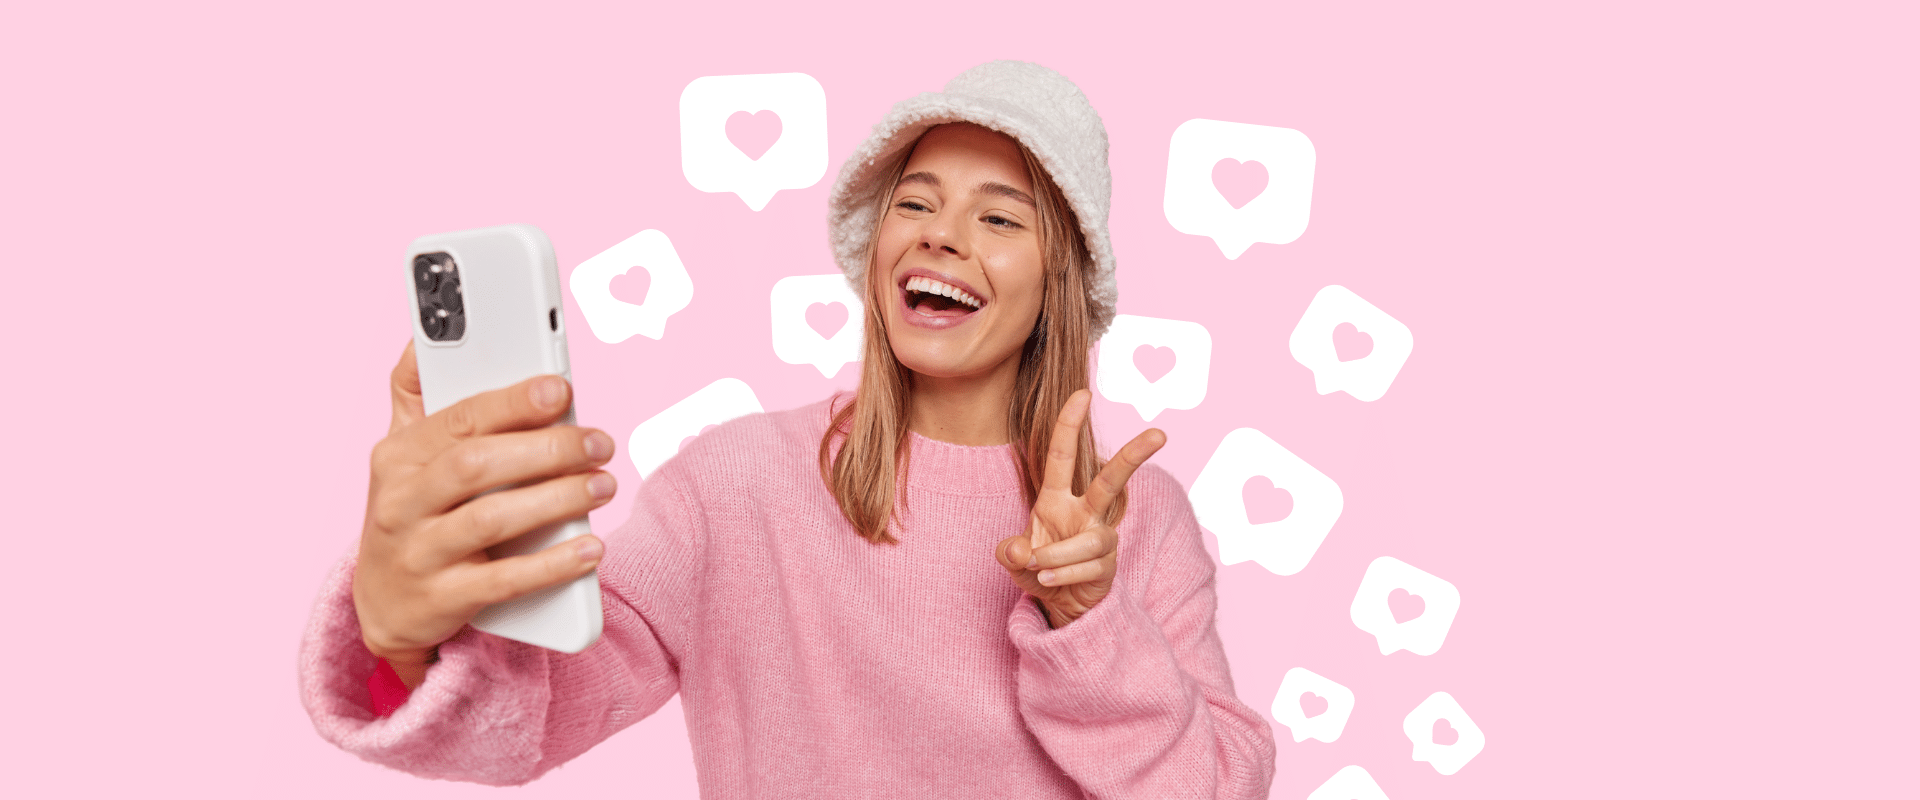 A girl is taking a selfie on a pink background.